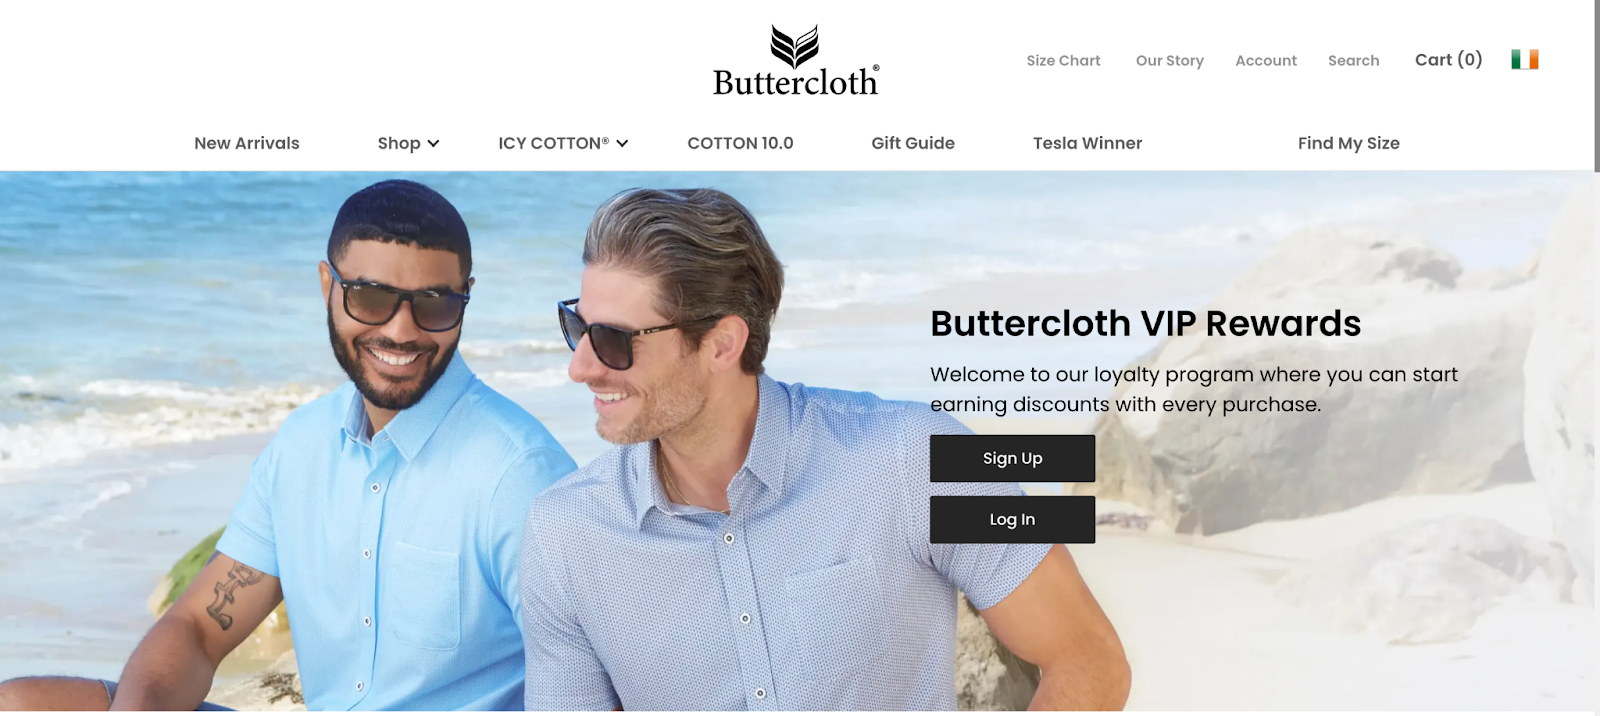 Ecommerce loyalty explainer page–A screenshot from Buttercloth’s rewards explainer page showing two men sitting on a beach with text reading “Buttercloth VIP Rewards” and Sign Up and Log In buttons.